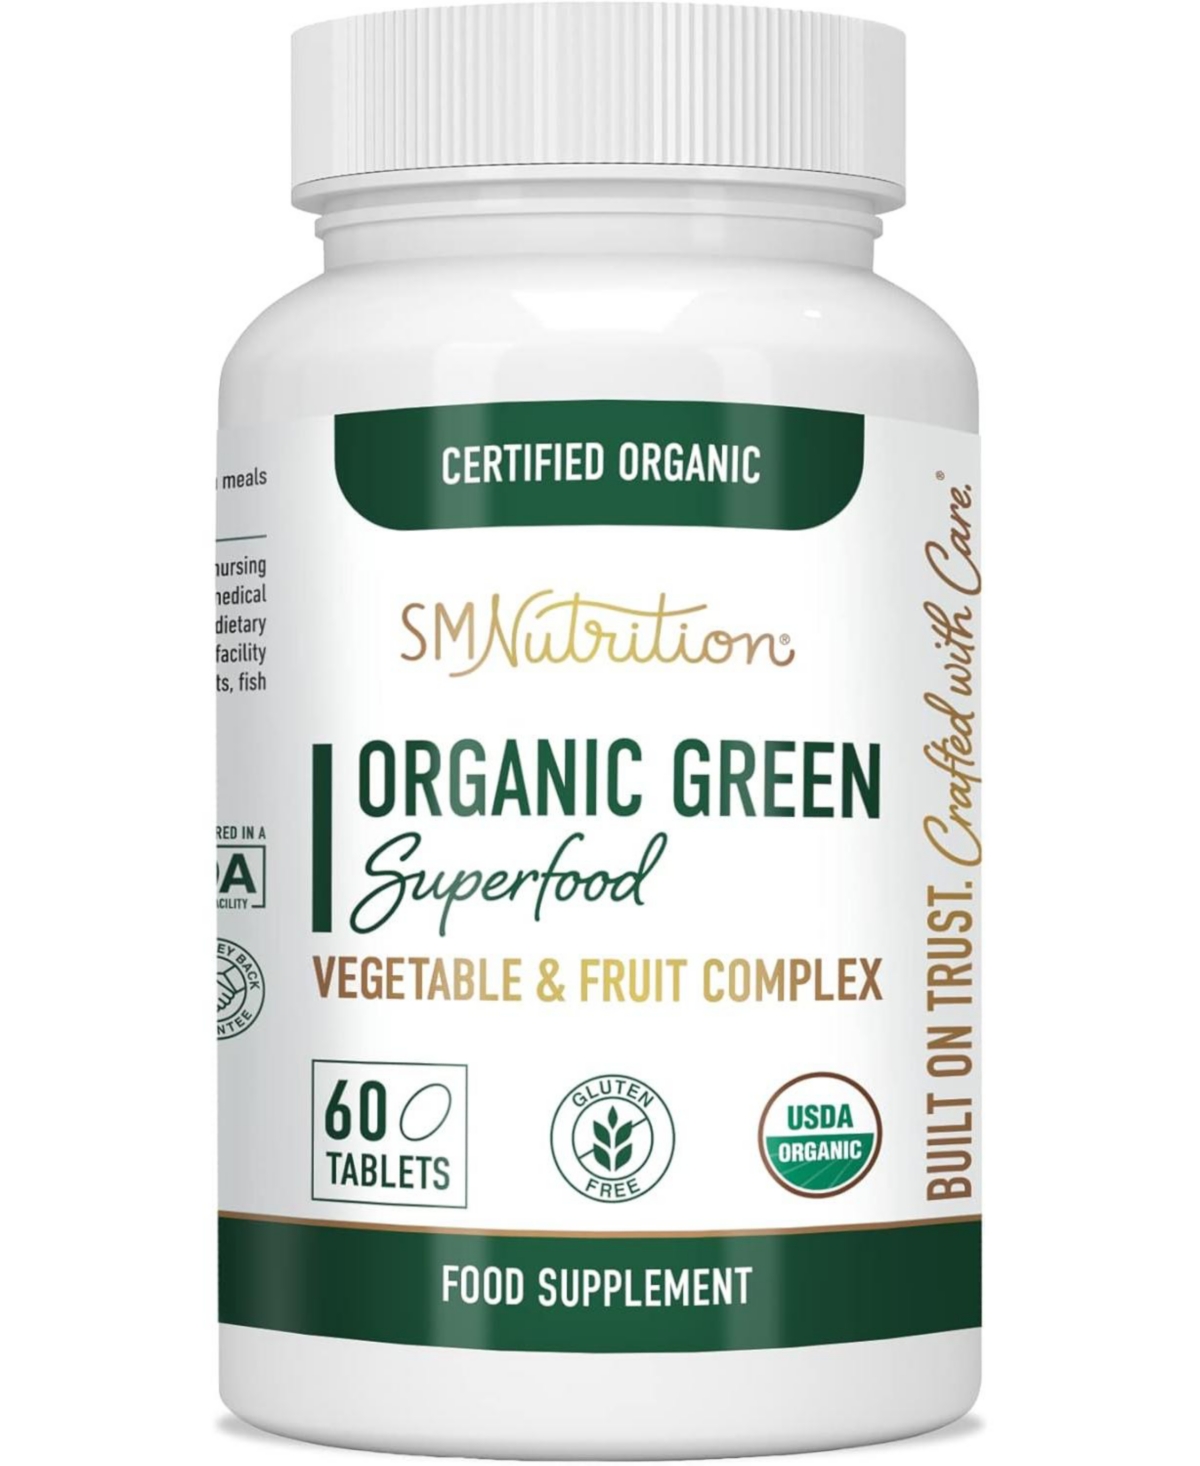 Organic Green Superfood Supplement Super Greens Whole Foods Tablets - Certified Organic, Non-gmo & Gluten-Free - 60 Tablets